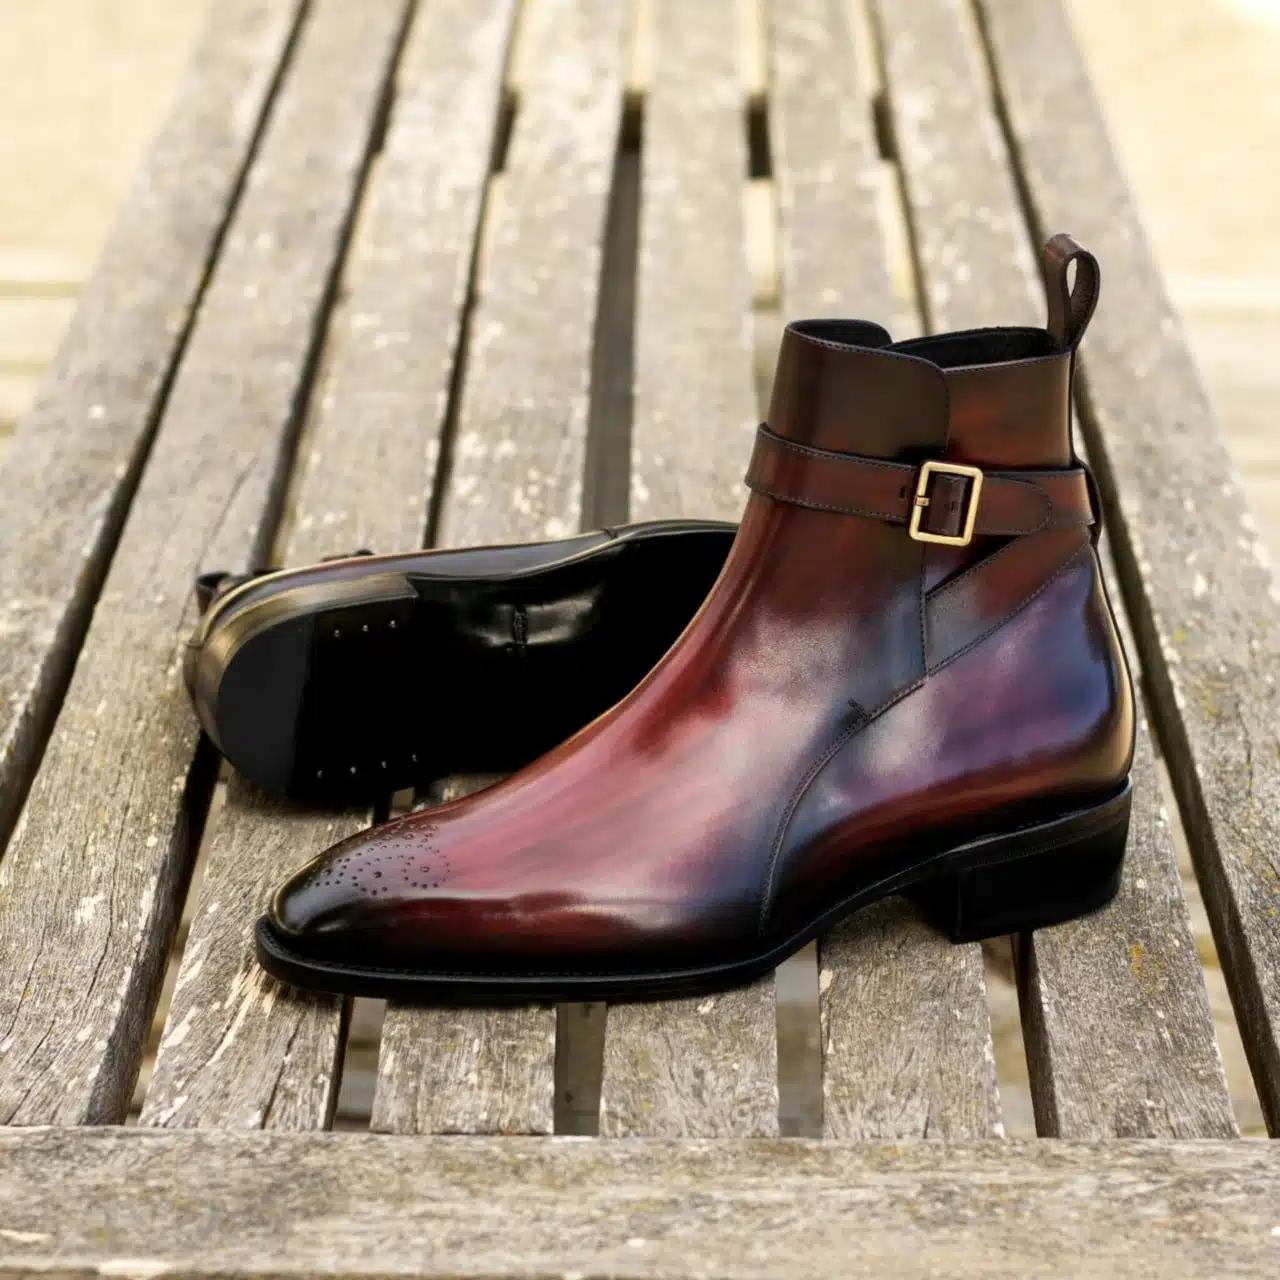 Introducing The Rush St. Jodhpur Boot No. 8063: A Masterpiece of Craftsmanship from Robert August